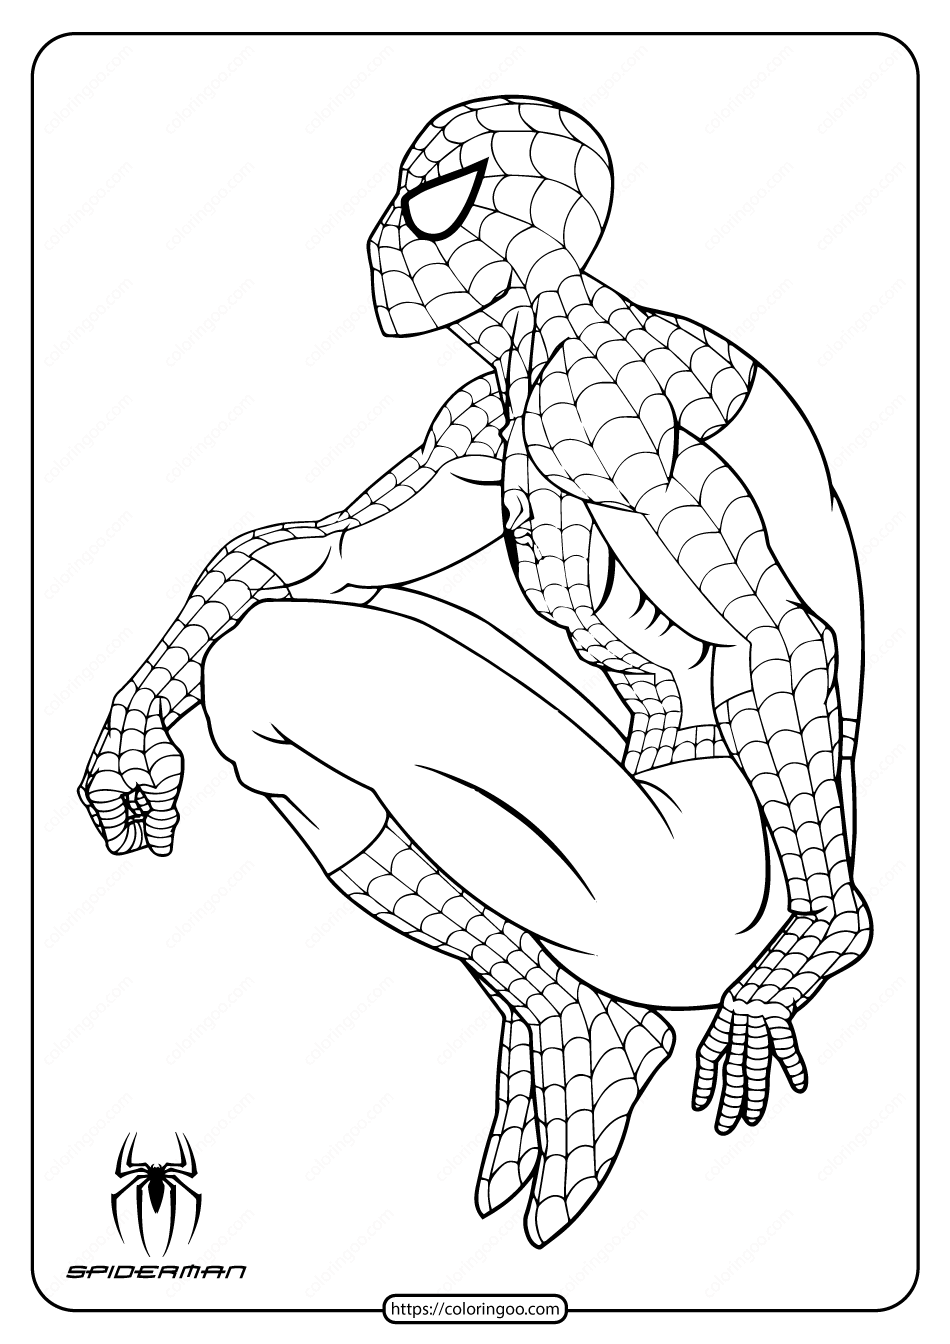 Download 139+ Spider Man Superhero Coloring Pages PNG PDF ...